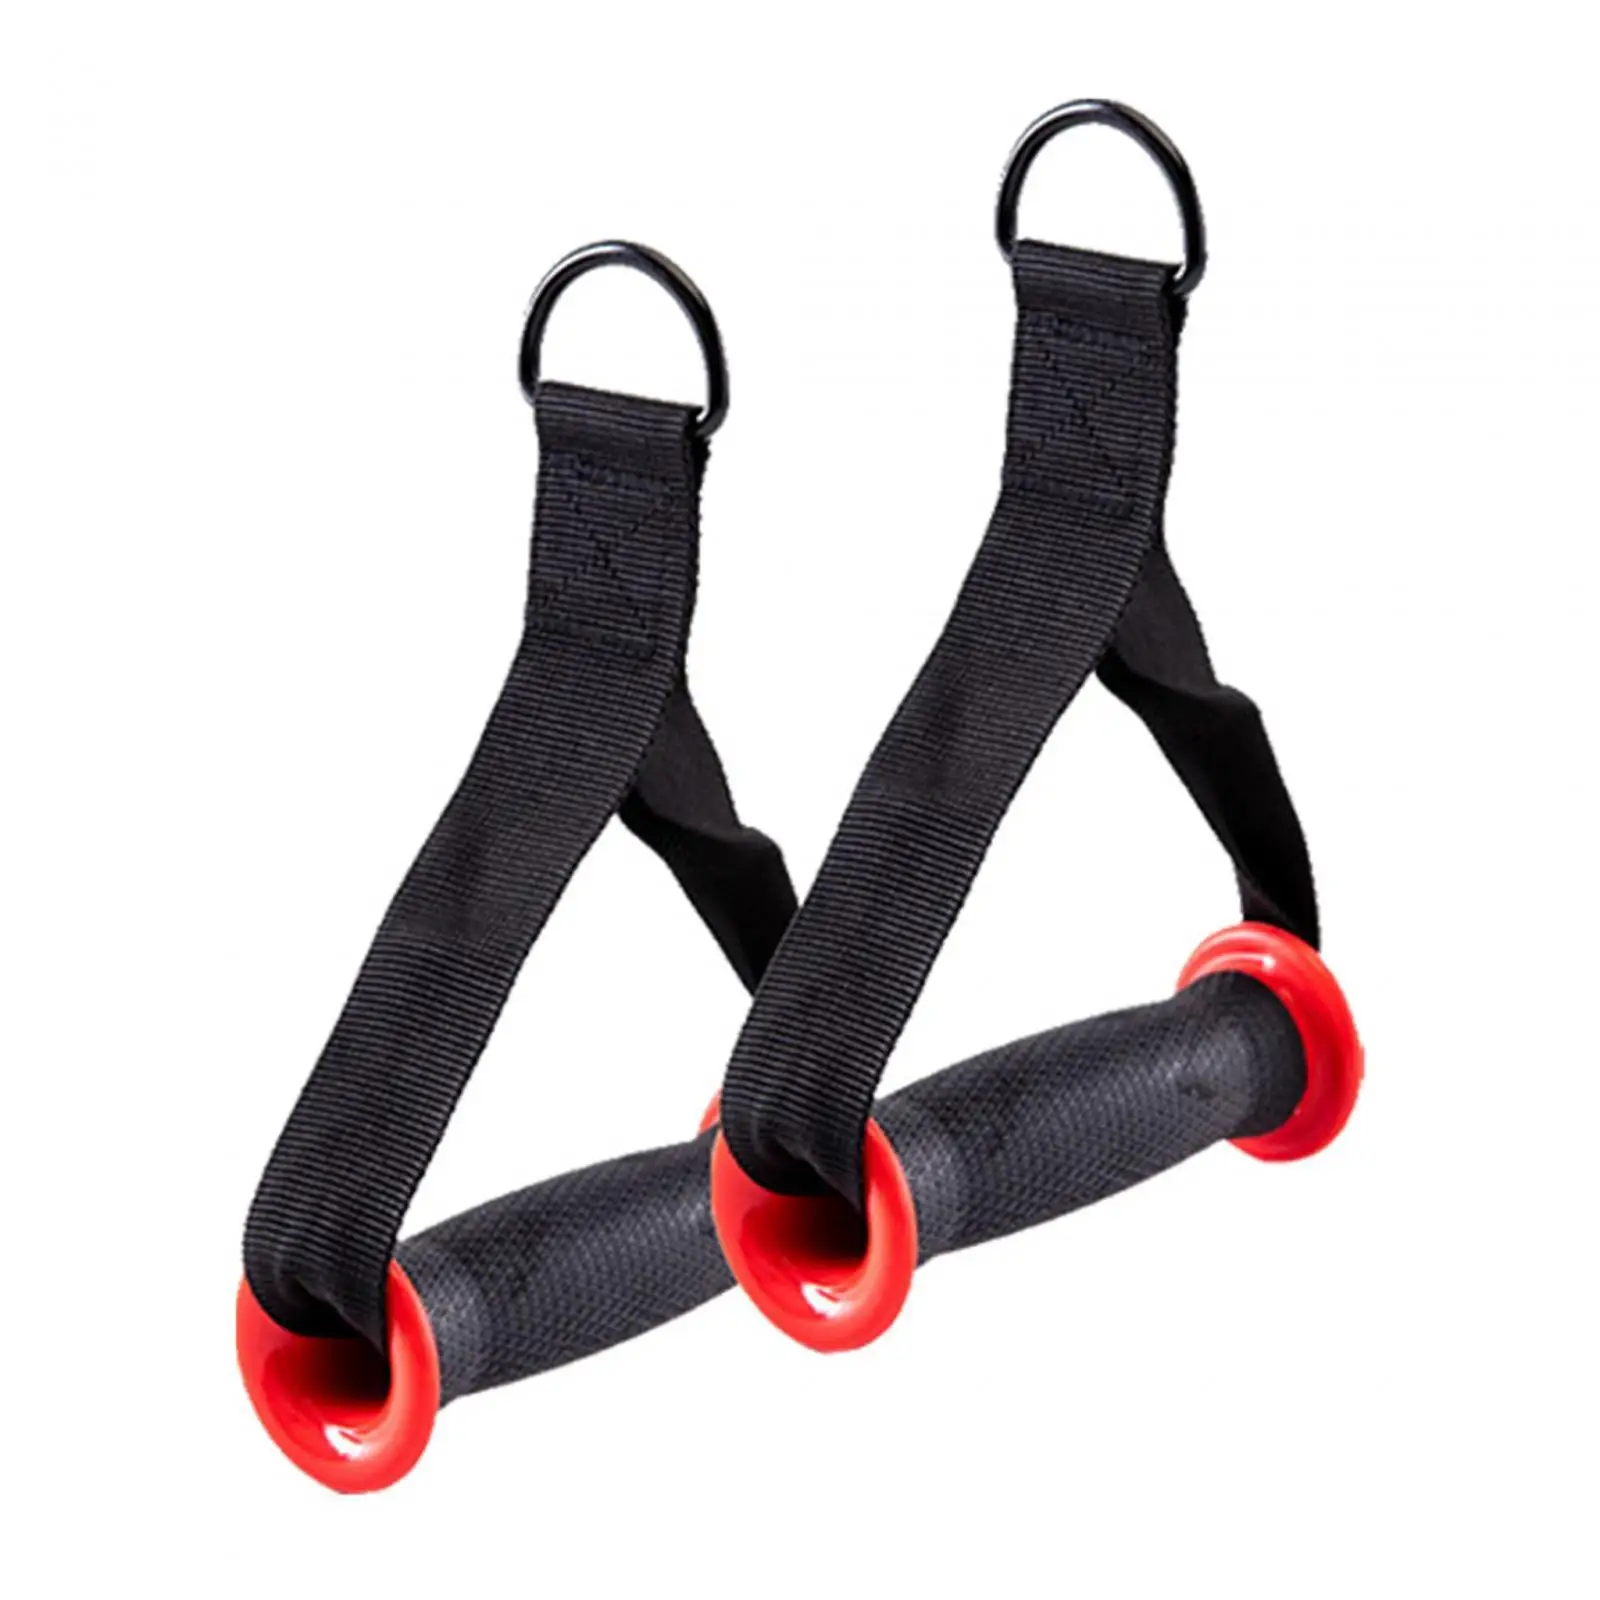 2x Cable Machine Attachment Handles Cable Attachment Body Fitness Workout Exercise Equipment Accessories Pull Band Handles